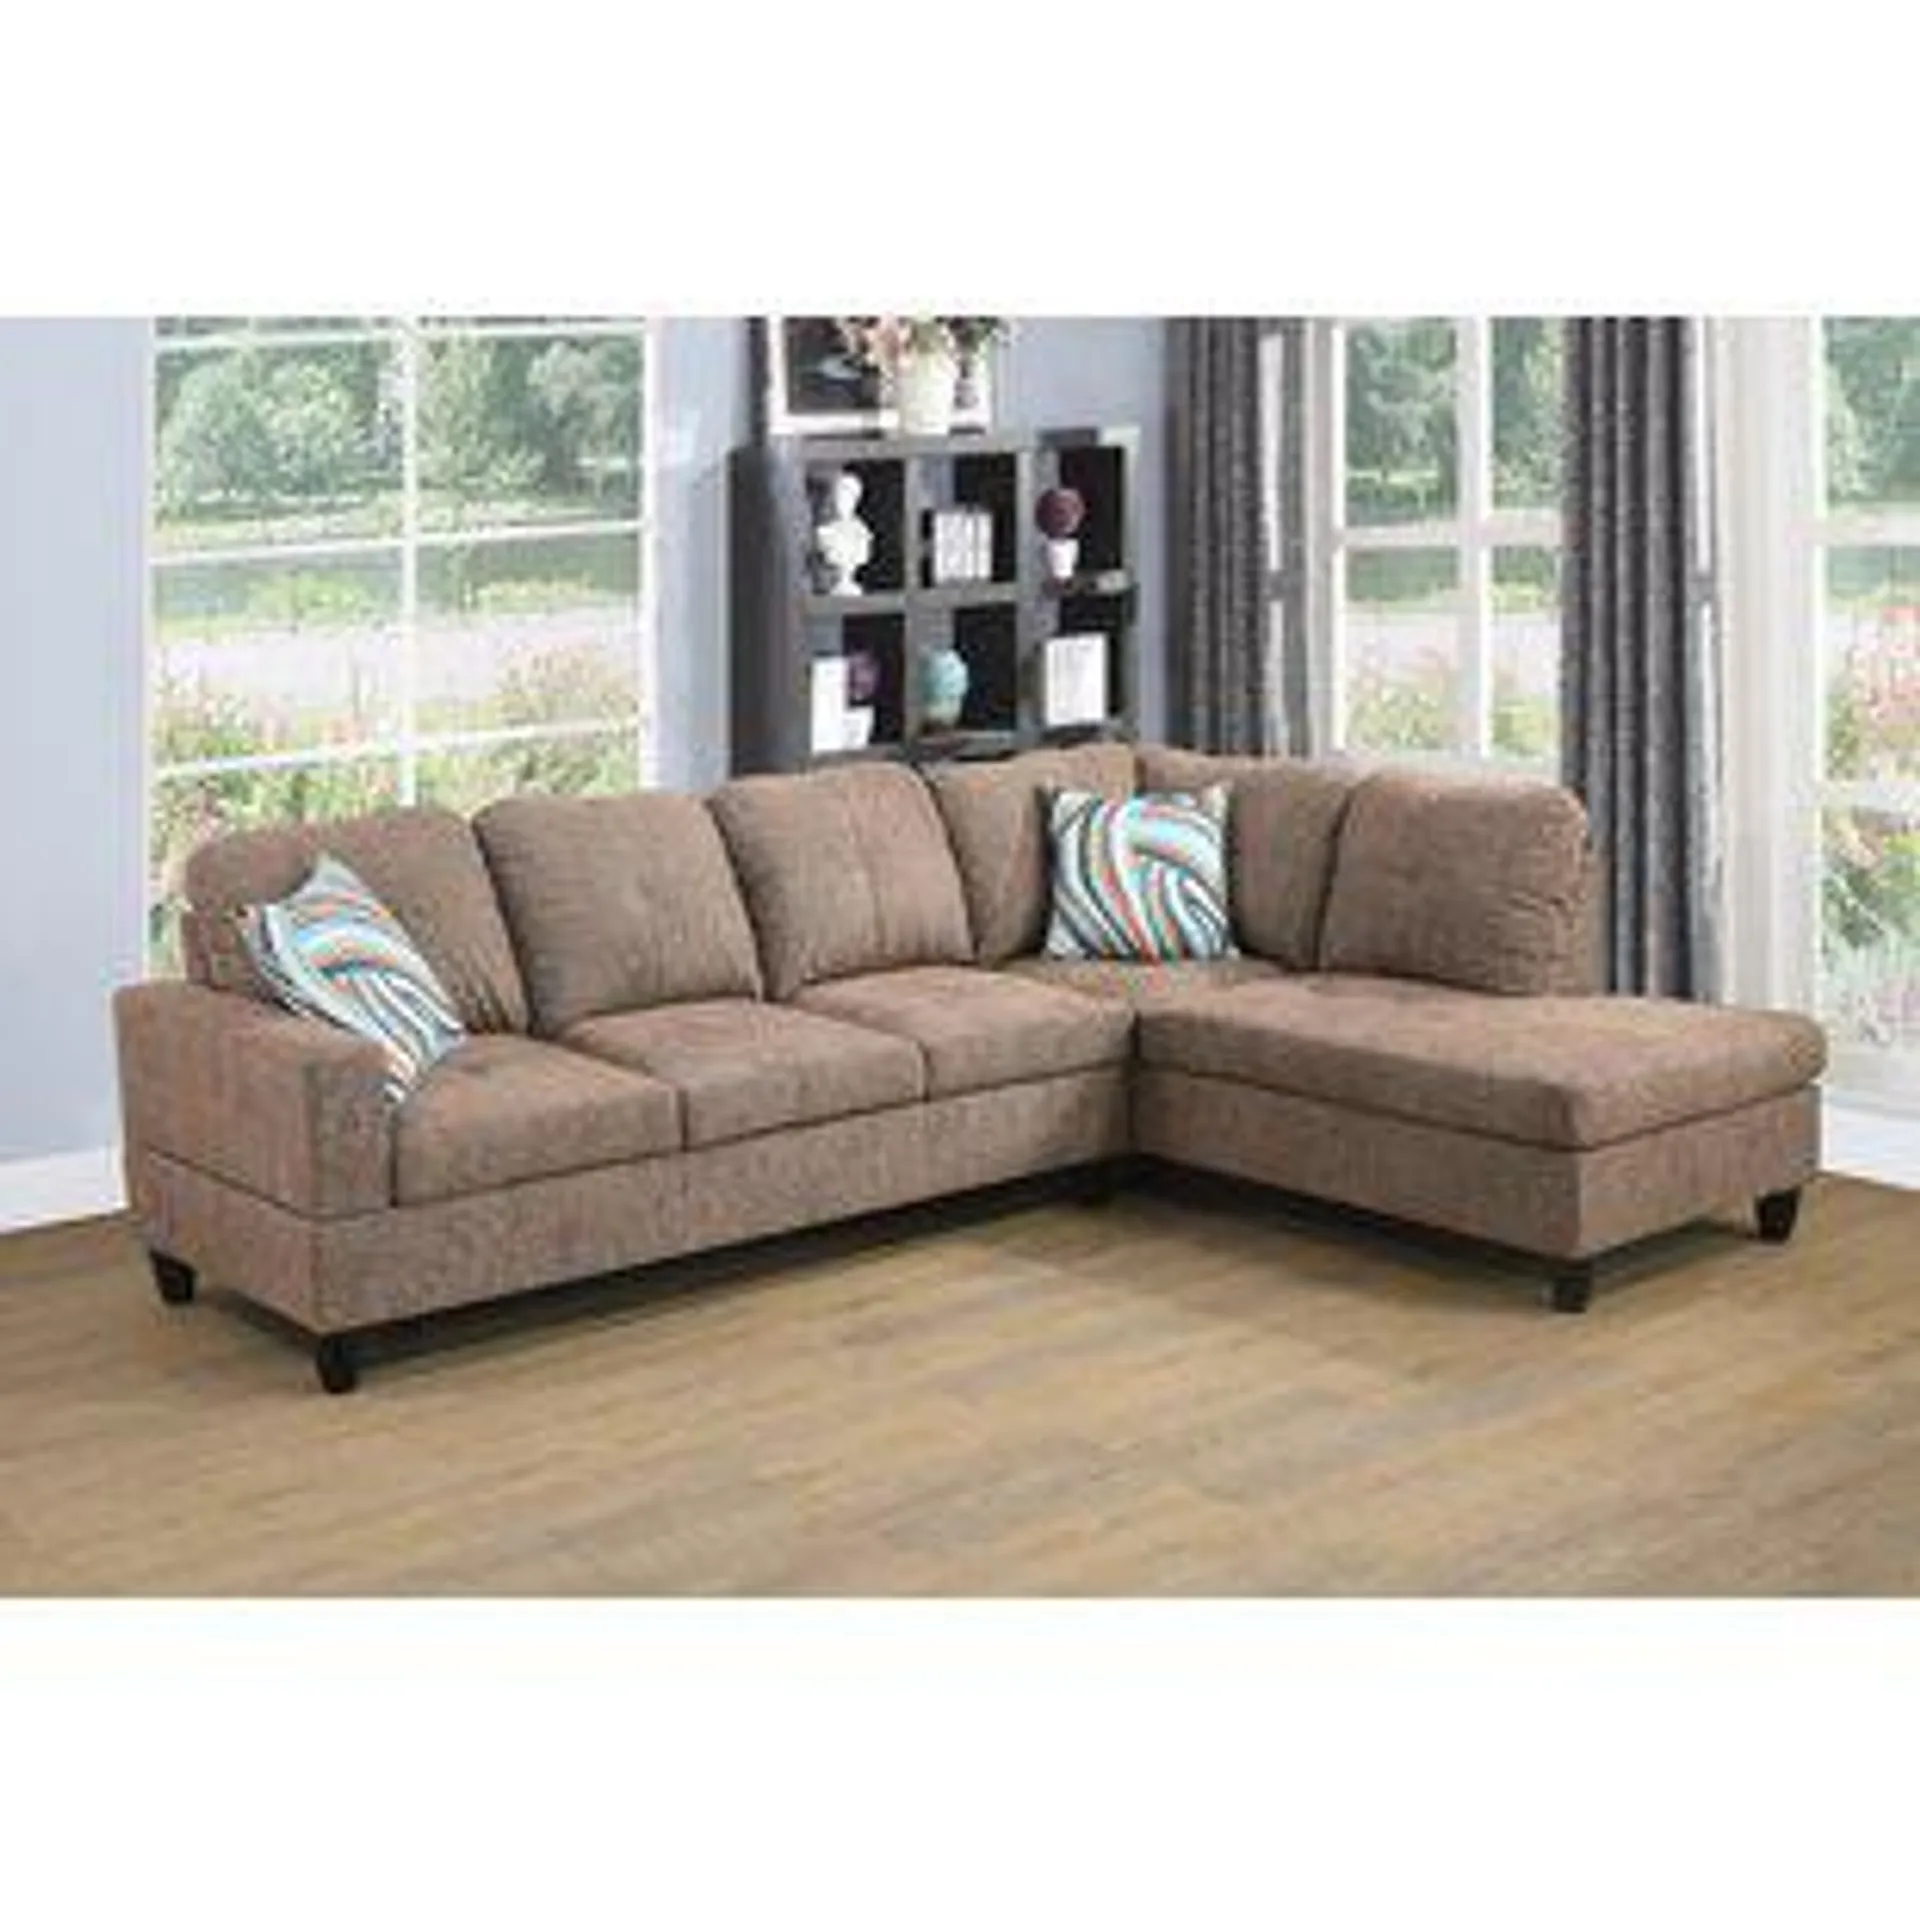 Asenath 3 - Piece Upholstered Sectional